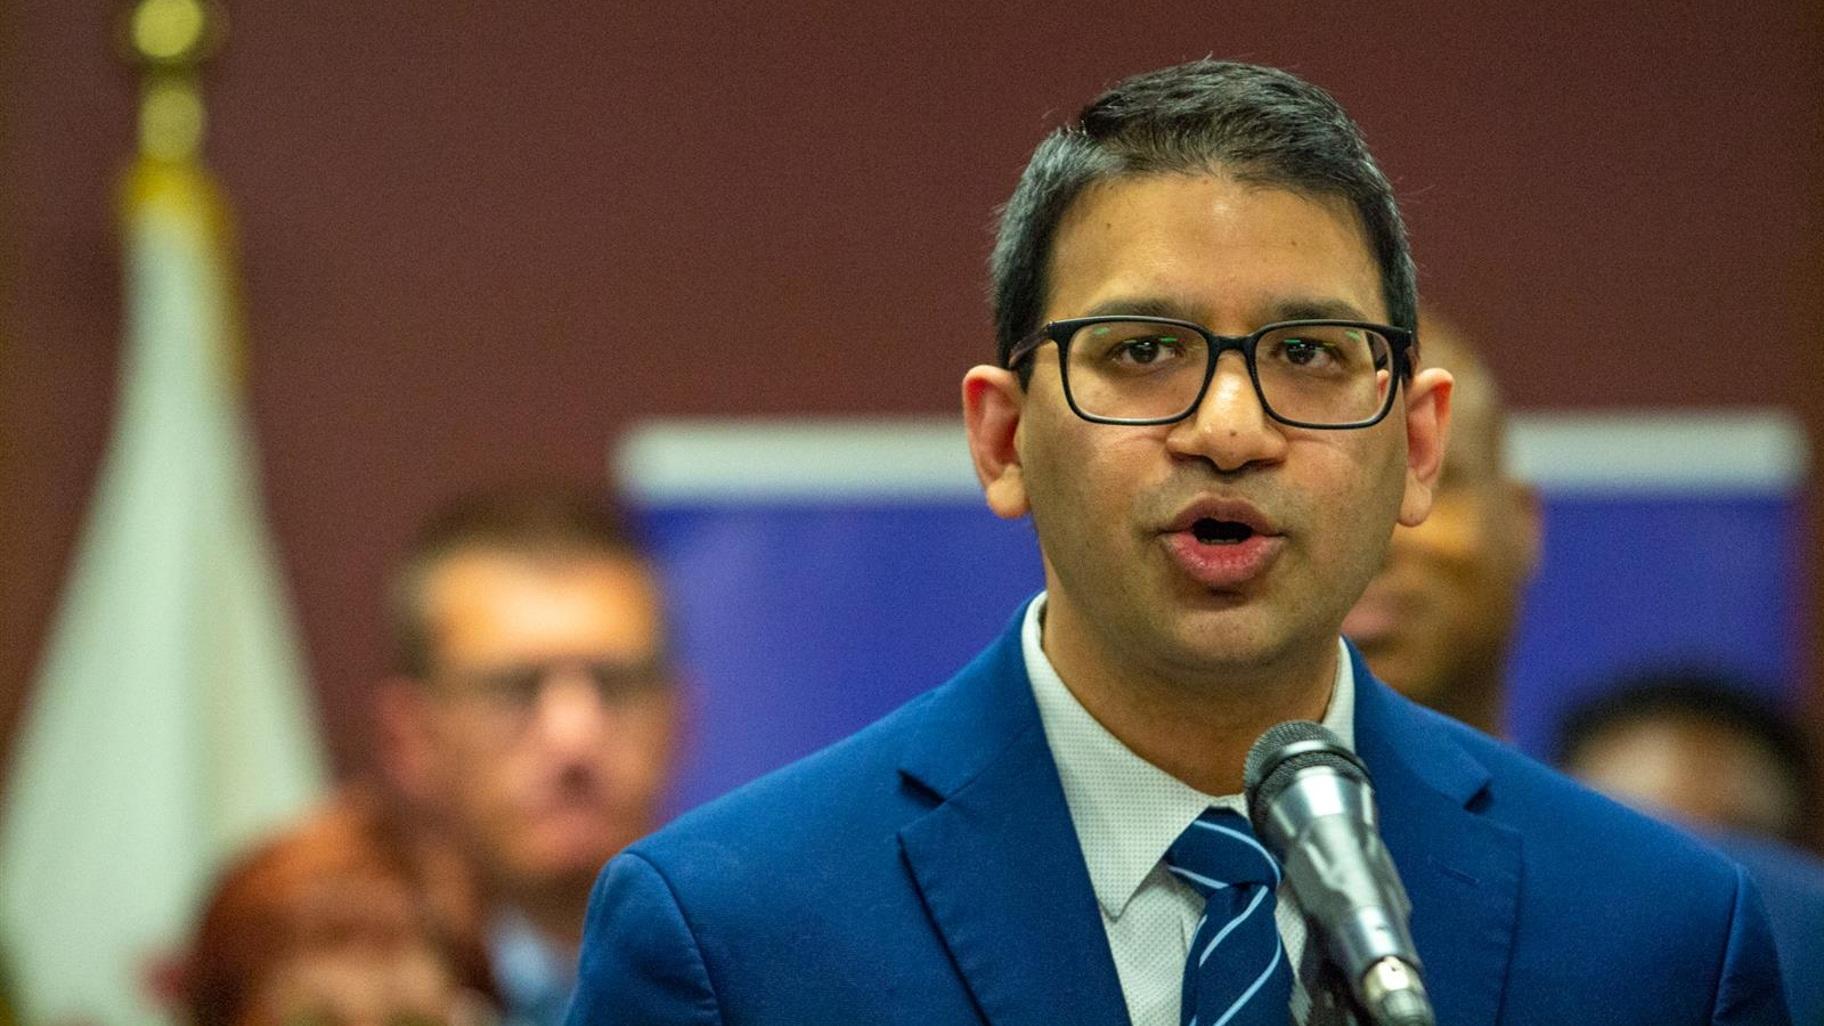 Illinois Department of Public Health Director Dr. Sameer Vohra is pictured at a news conference in Springfield in May 2023. IDPH is warning Illinoisans to take precautions against the spread of respiratory viruses as hospitalizations rise. (Jerry Nowicki / Capitol News Illinois)